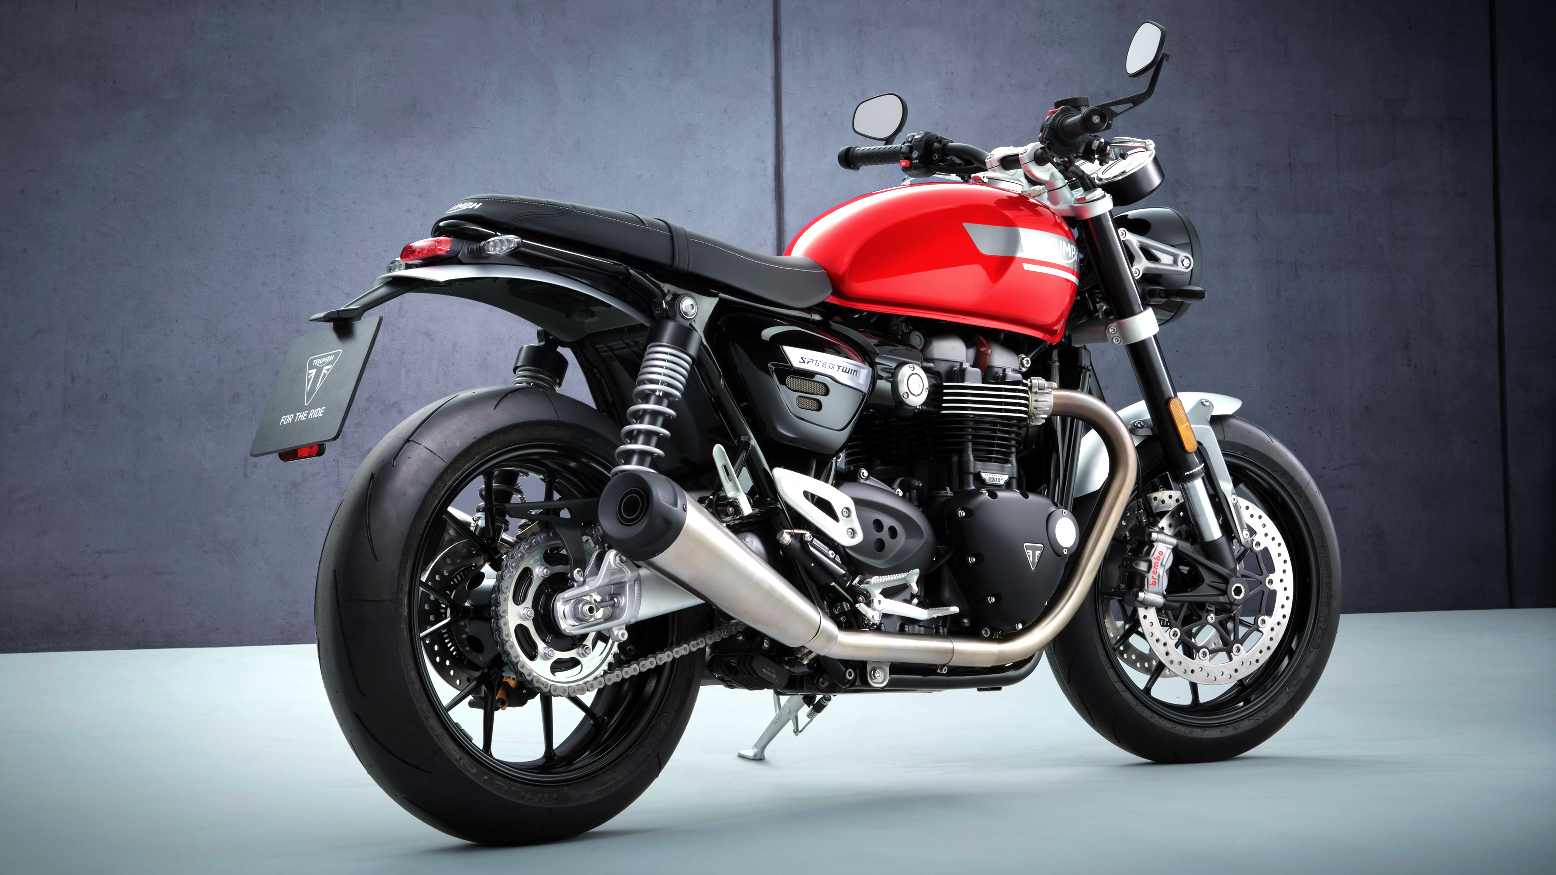 Expect the updated Triumph Speed Twin to go on sale in India later this year. Image: Triumph Motorcycles